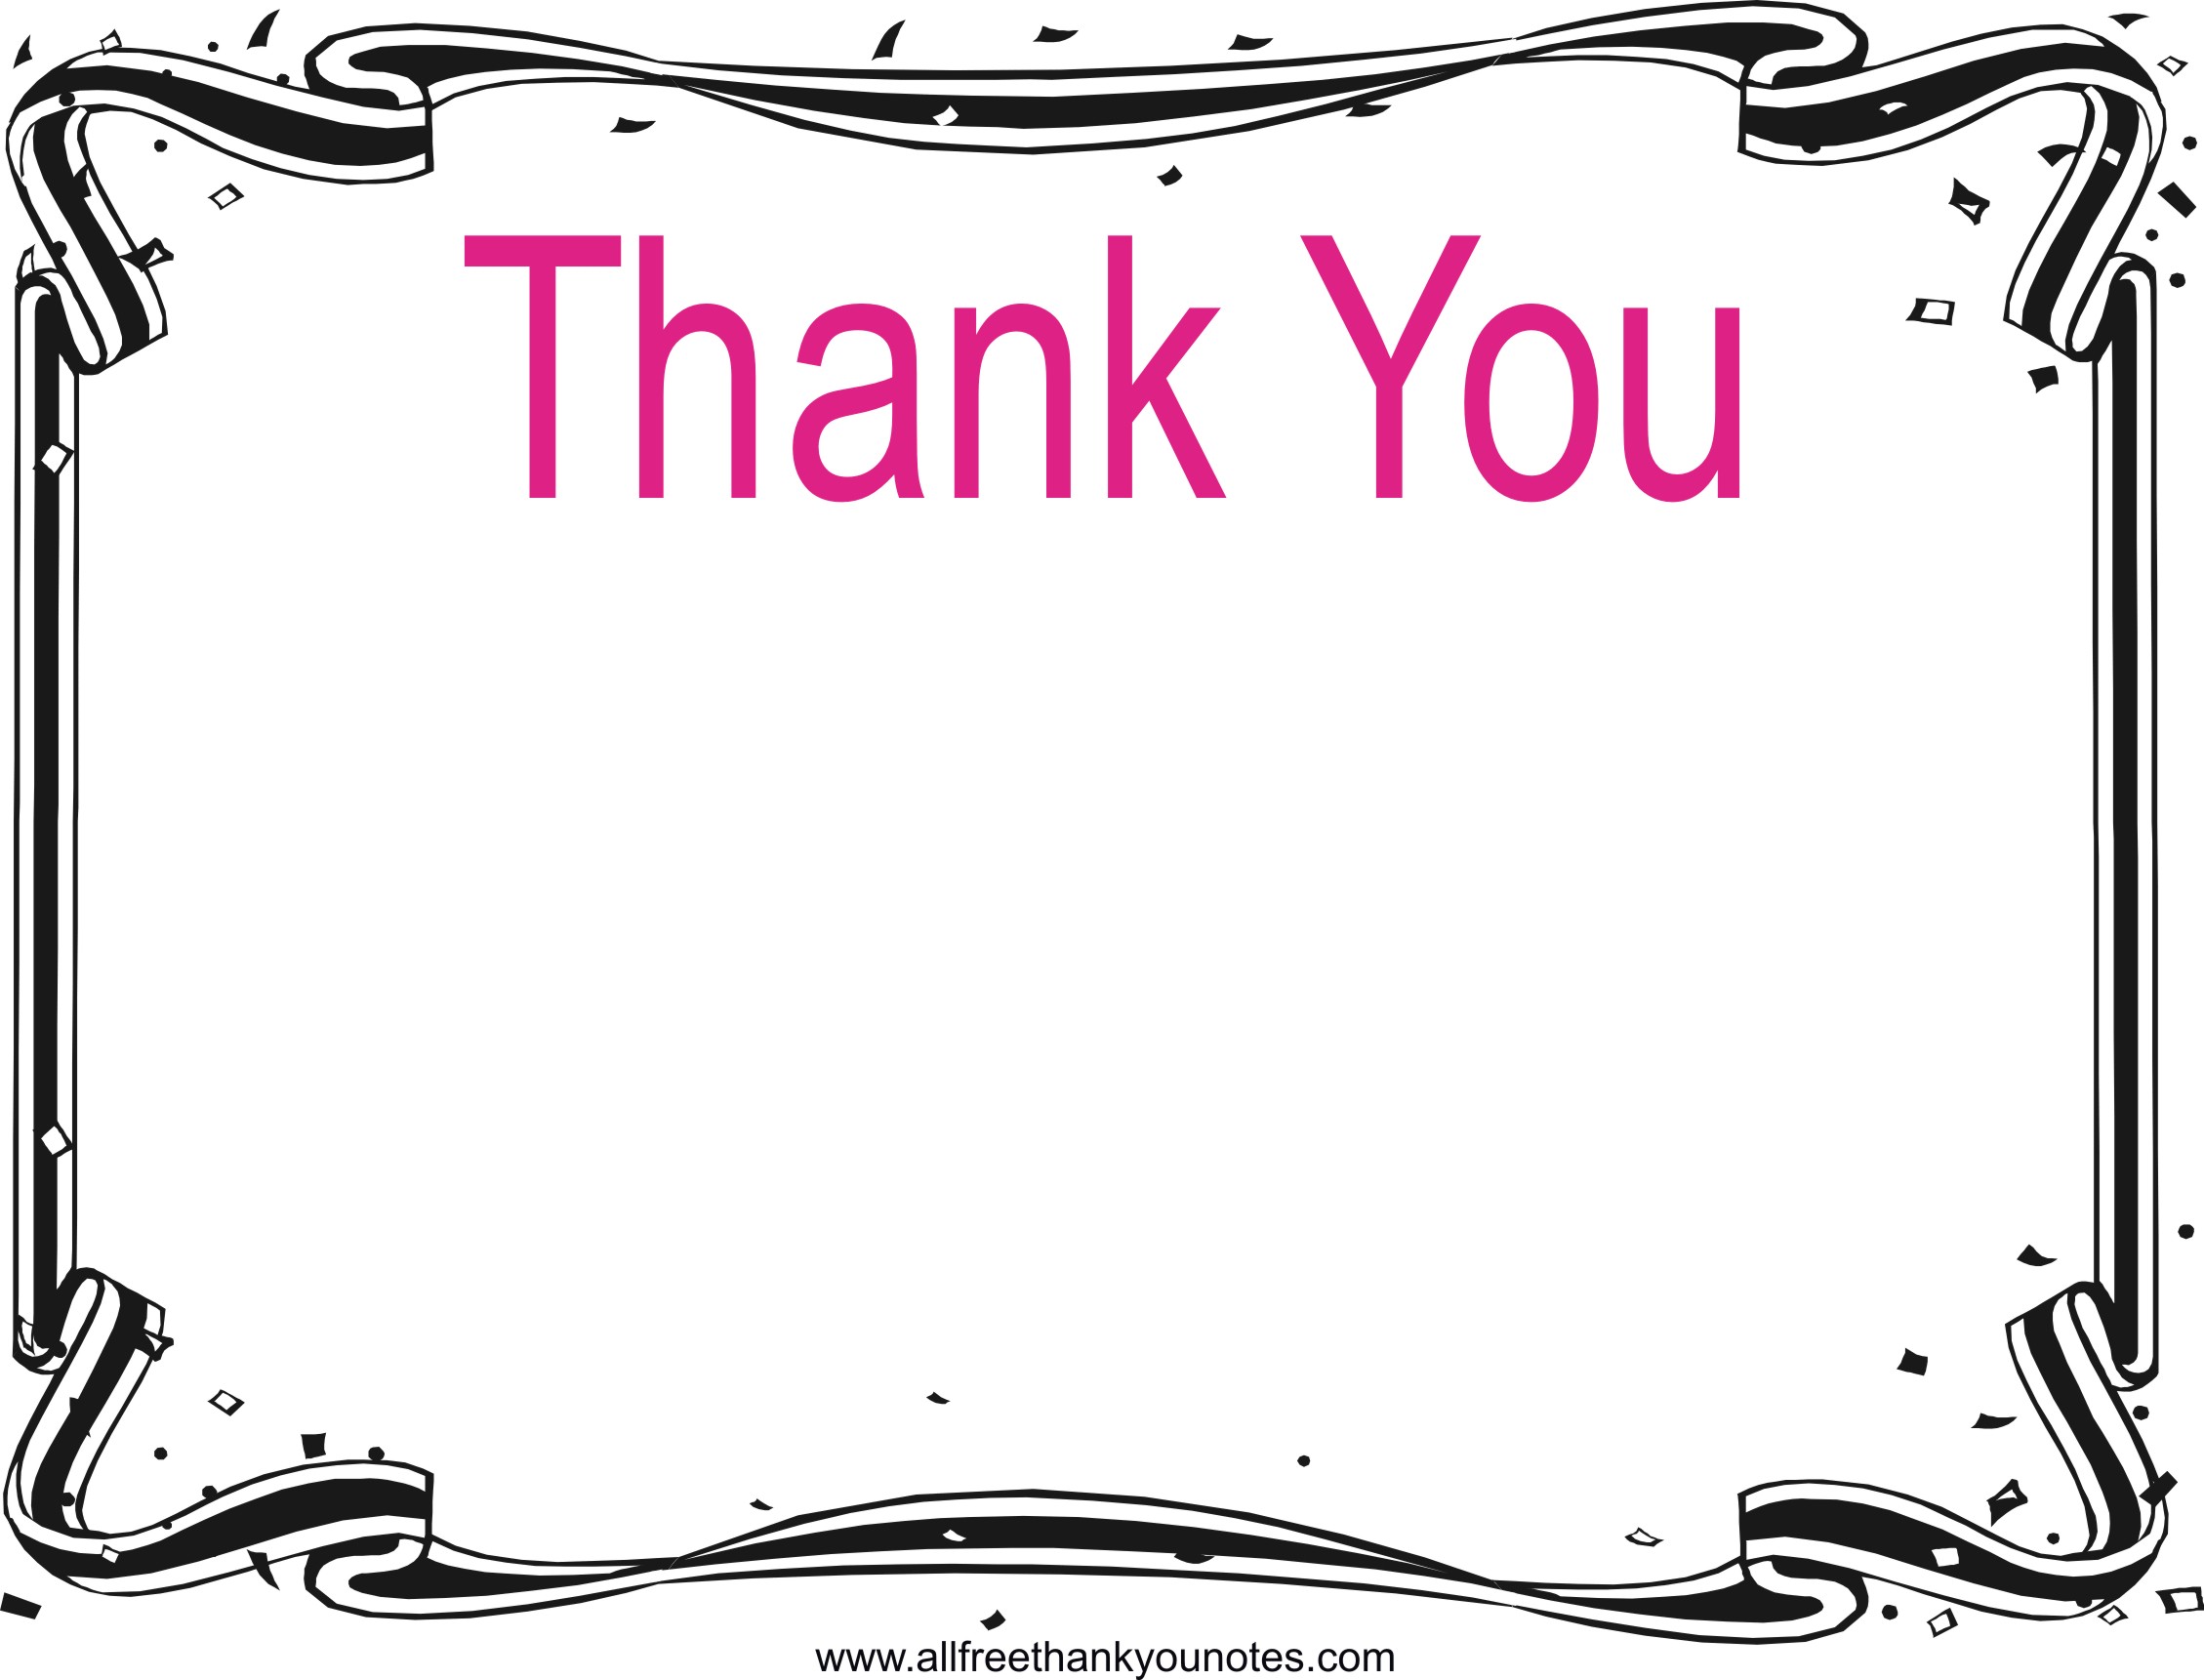 Thank You Kids - Free Clipart Images